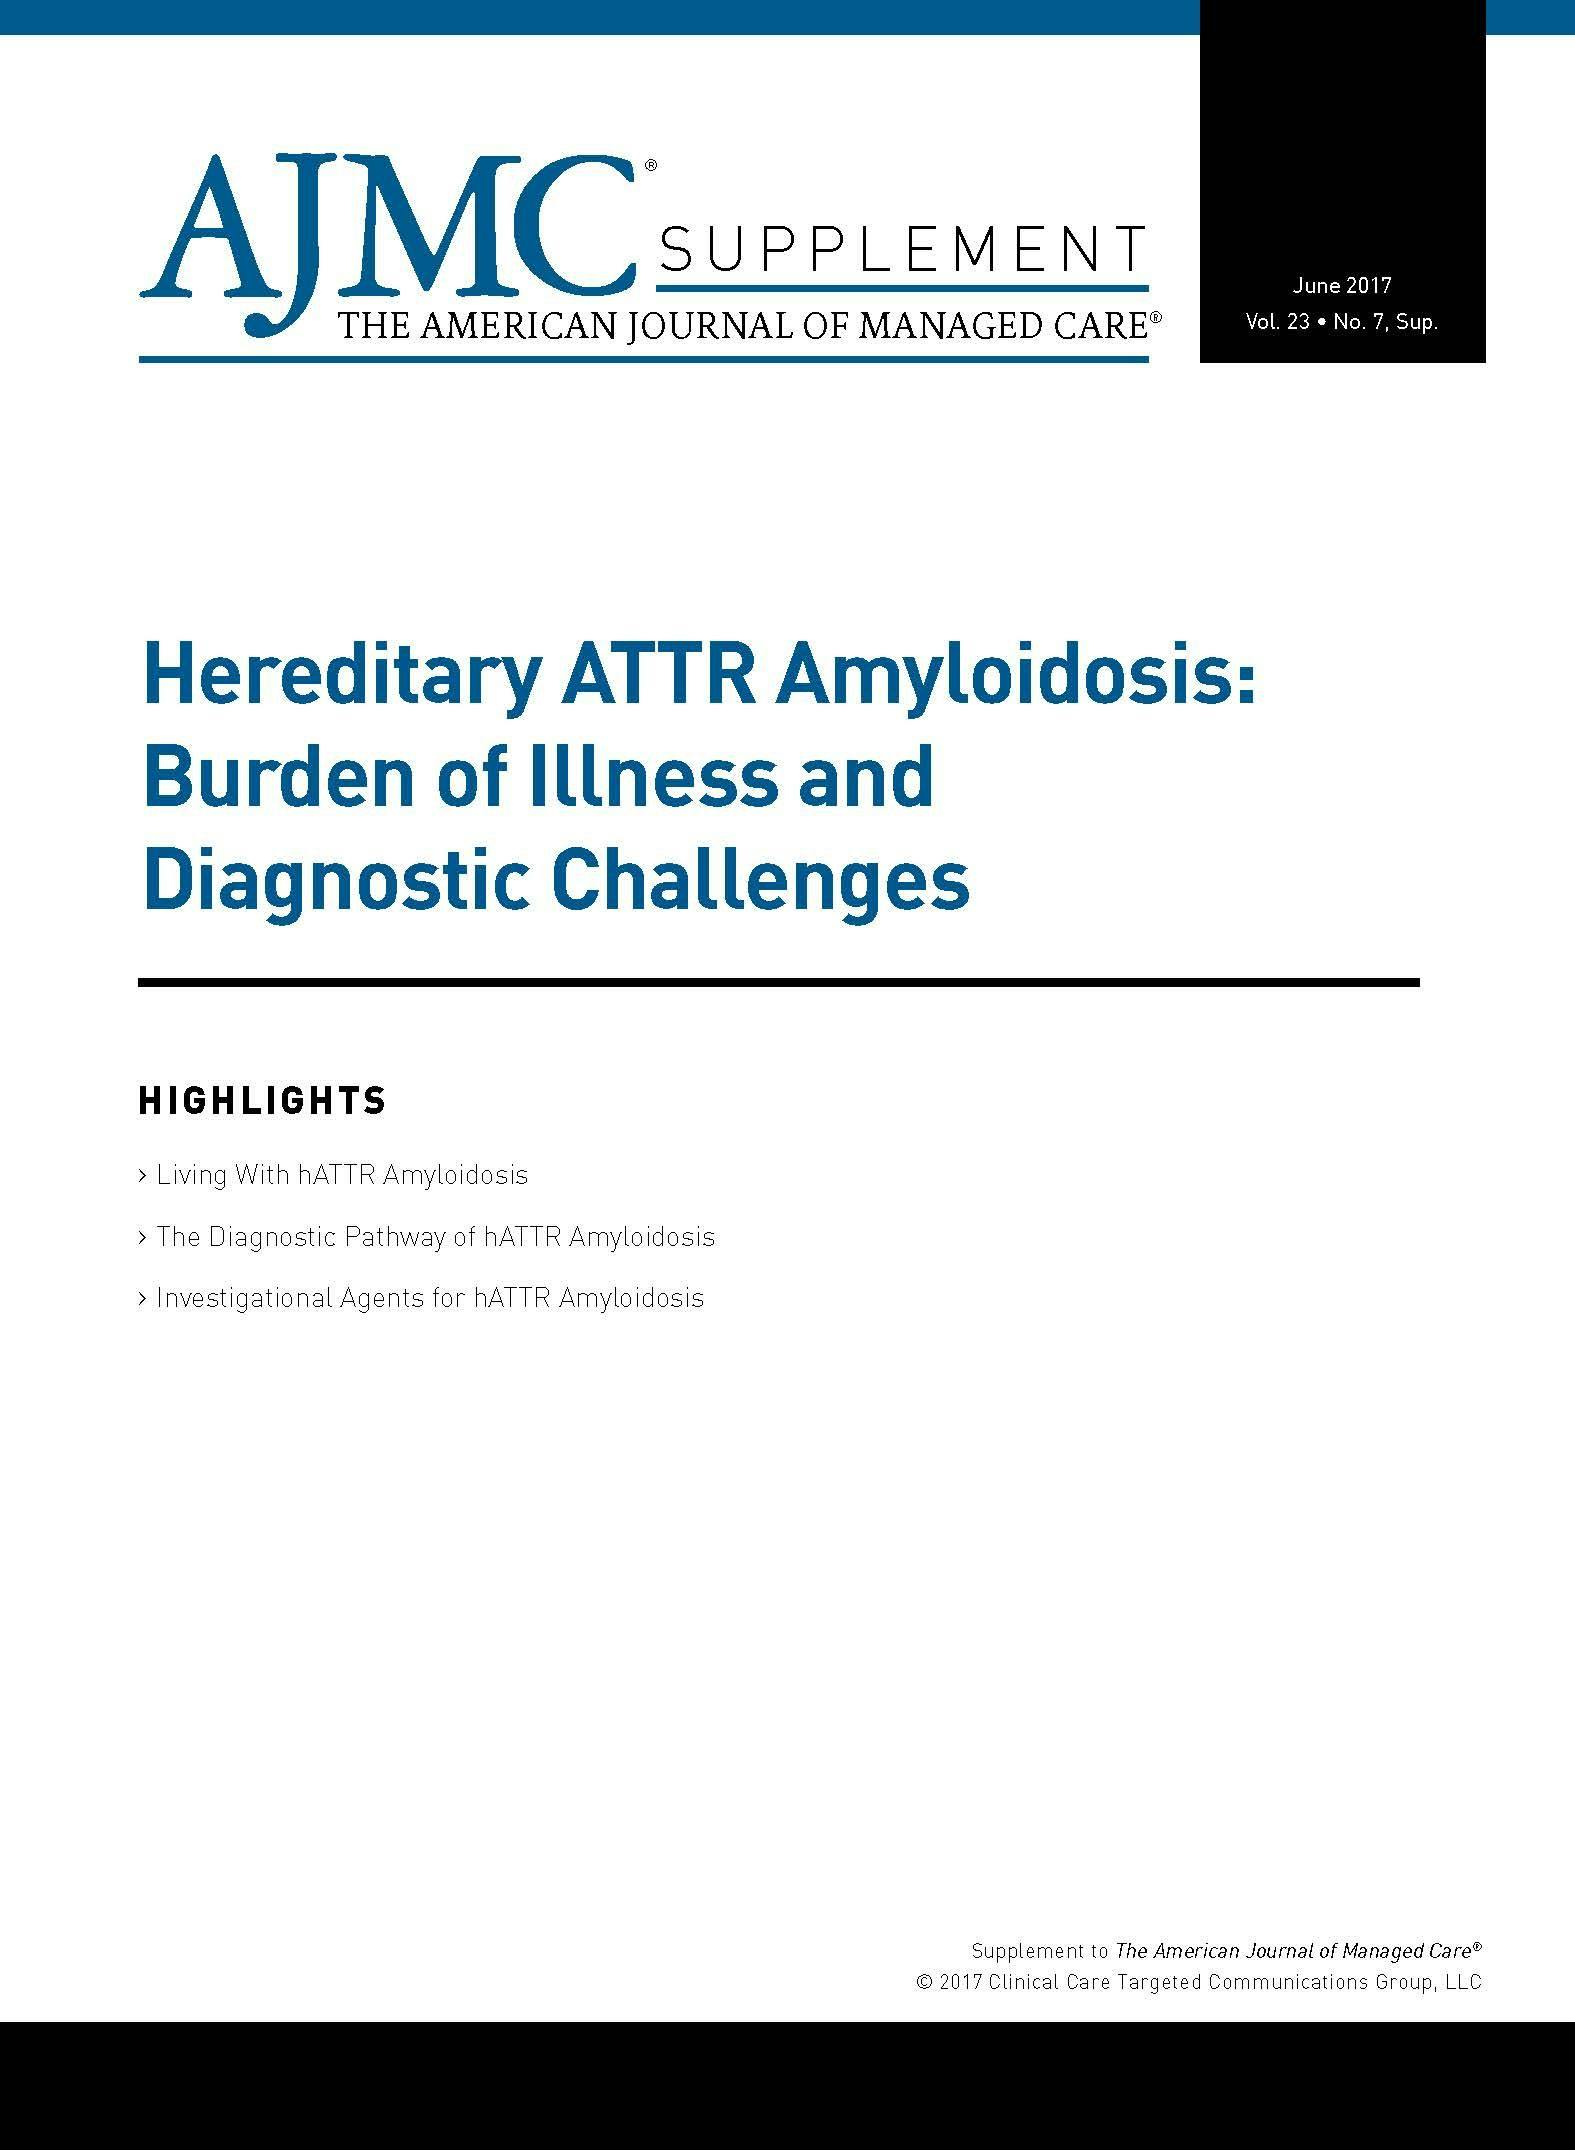 Hereditary ATTR Amyloidosis: Burden of Illness and Diagnostic Challenges